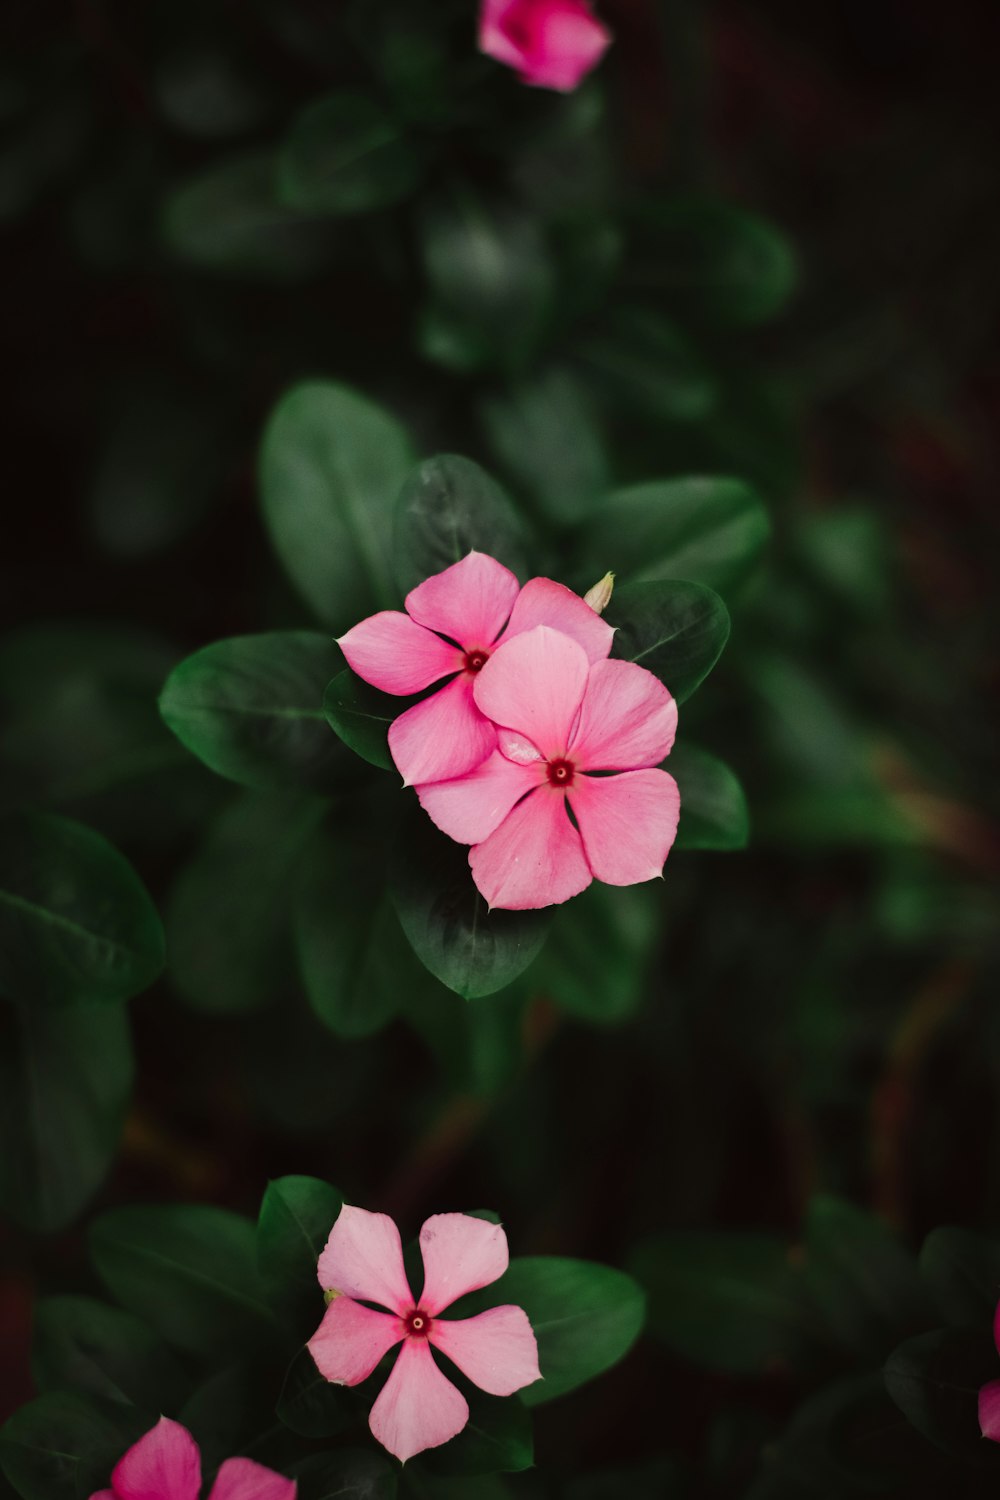 pink flowers with green leaves in the background